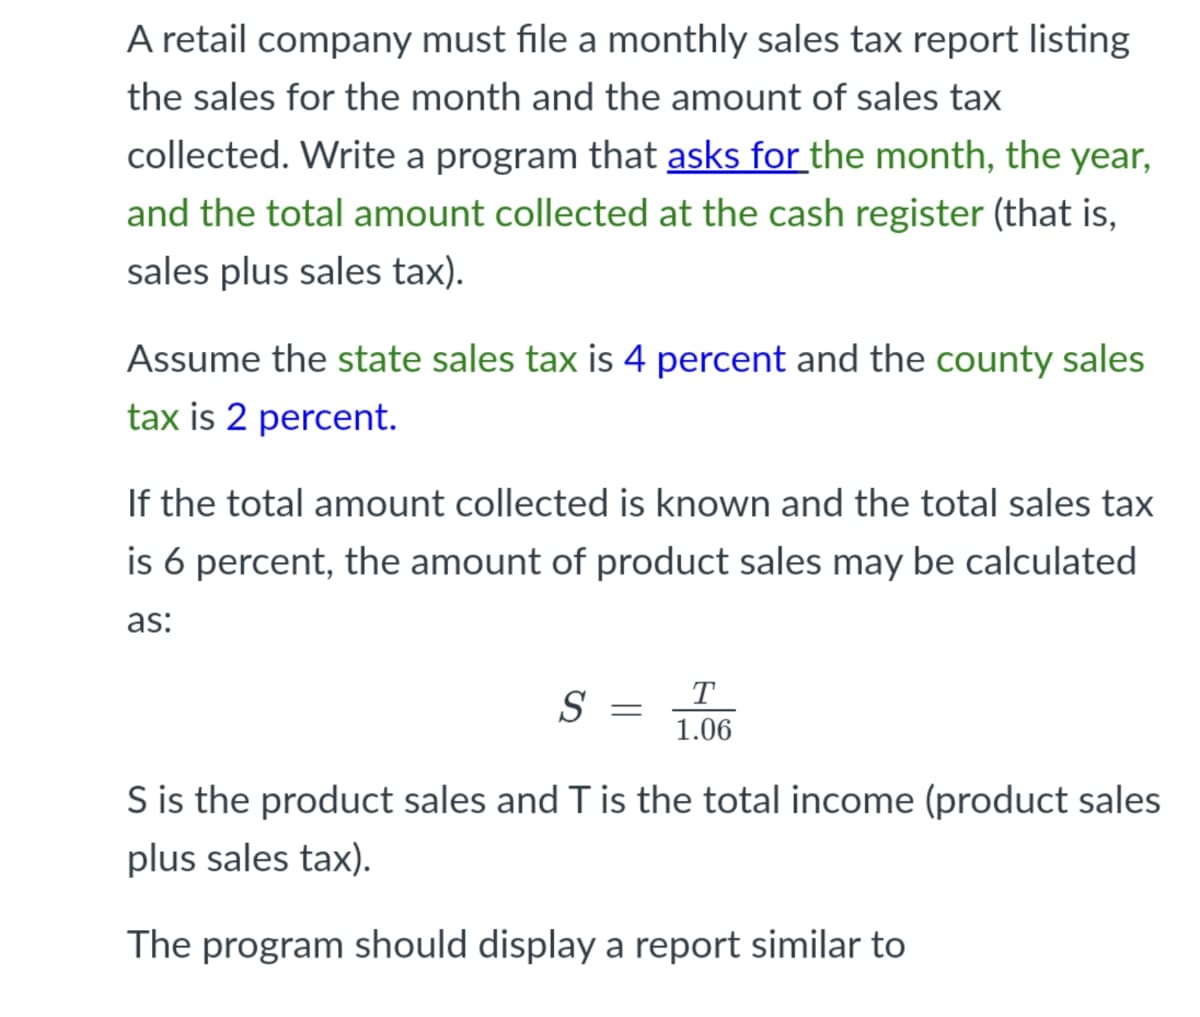 A retail company must file a monthly sales tax report listing
the sales for the month and the amount of sales tax
collected. Write a program that asks for the month, the year,
and the total amount collected at the cash register (that is,
sales plus sales tax).
Assume the state sales tax is 4 percent and the county sales
tax is 2 percent.
If the total amount collected is known and the total sales tax
is 6 percent, the amount of product sales may be calculated
as:
T
S
1.06
S is the product sales and T is the total income (product sales
plus sales tax).
The program should display a report similar to
